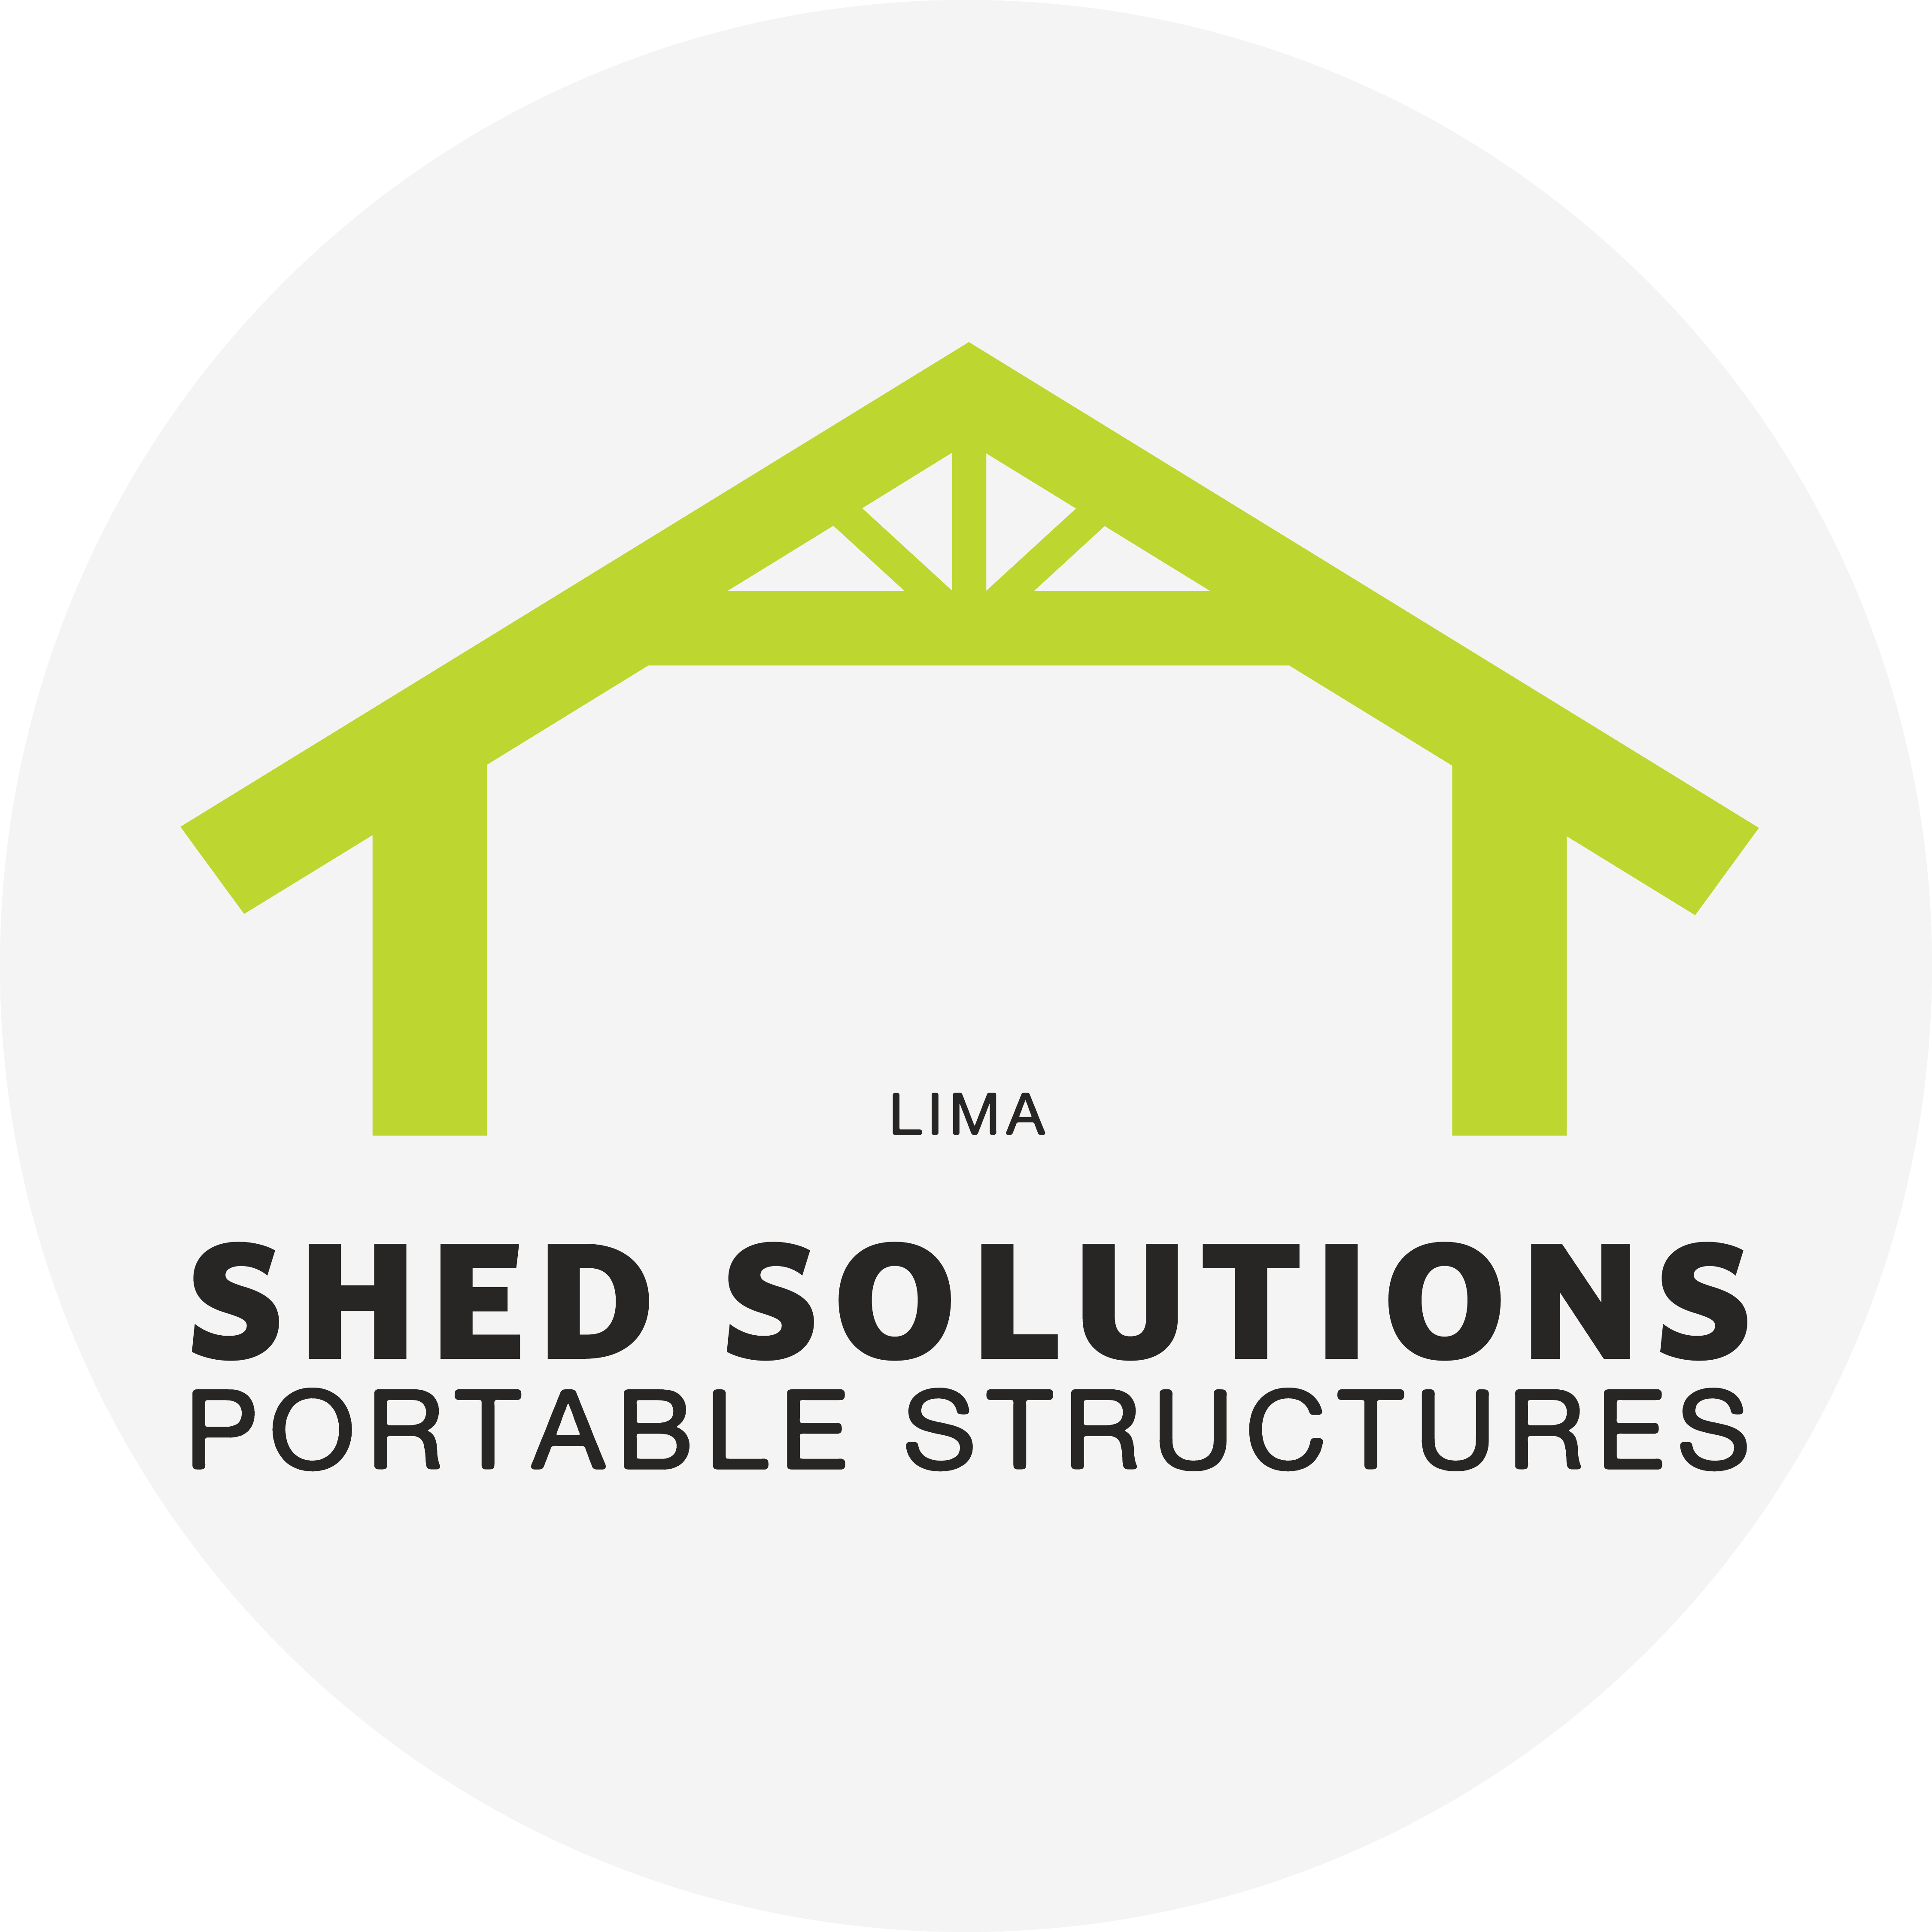 Logo for Shed Solutions in Lima, Ohio